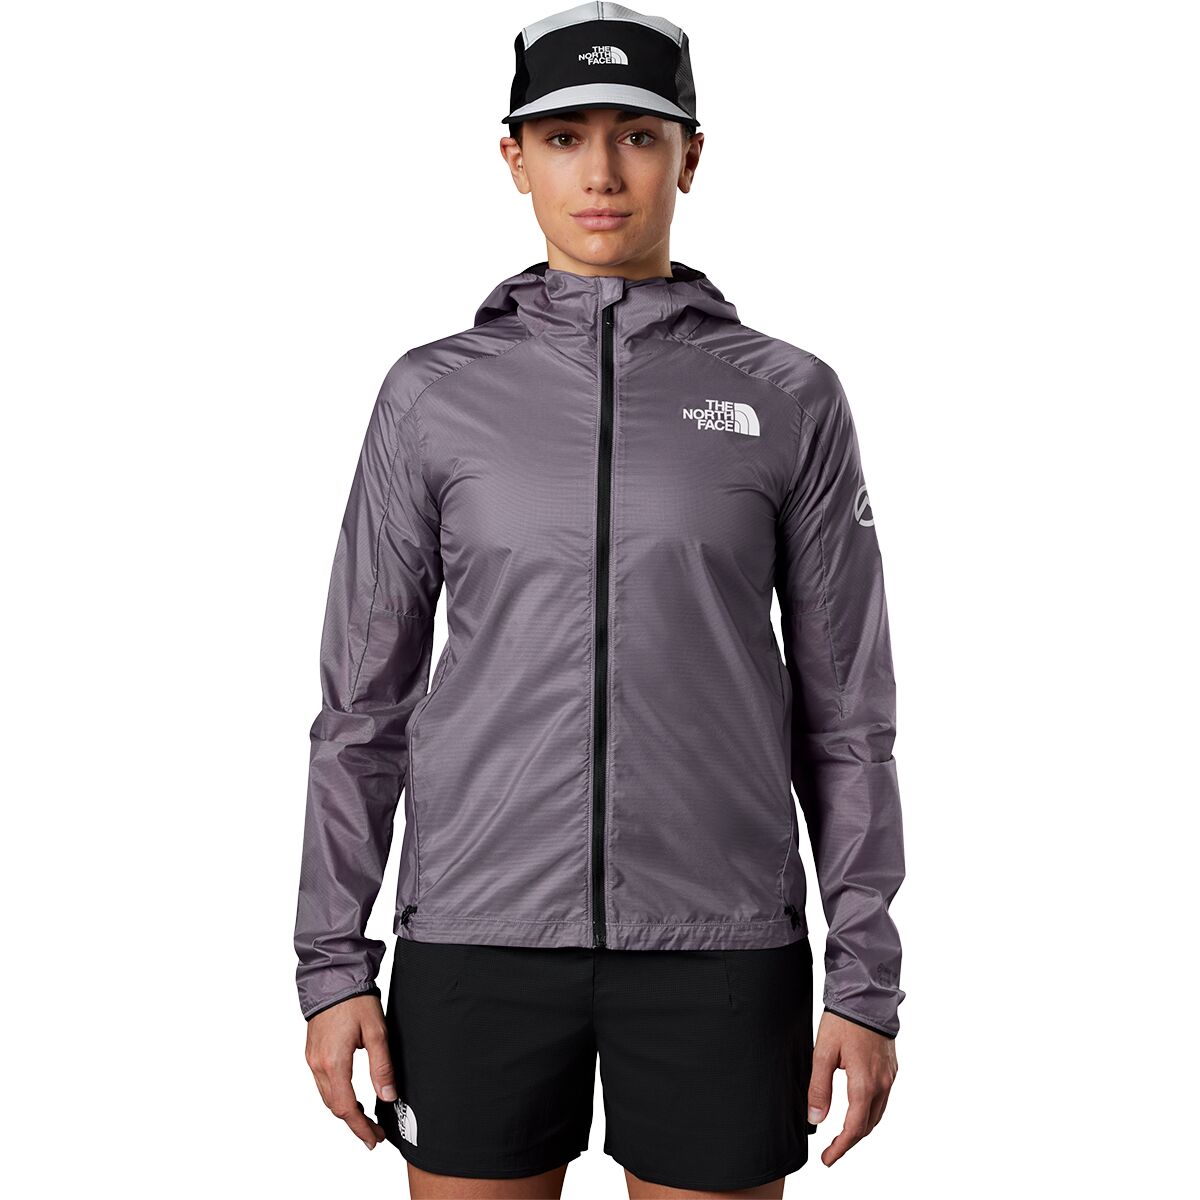 The North Face Summit Superior Wind Jacket - Women's